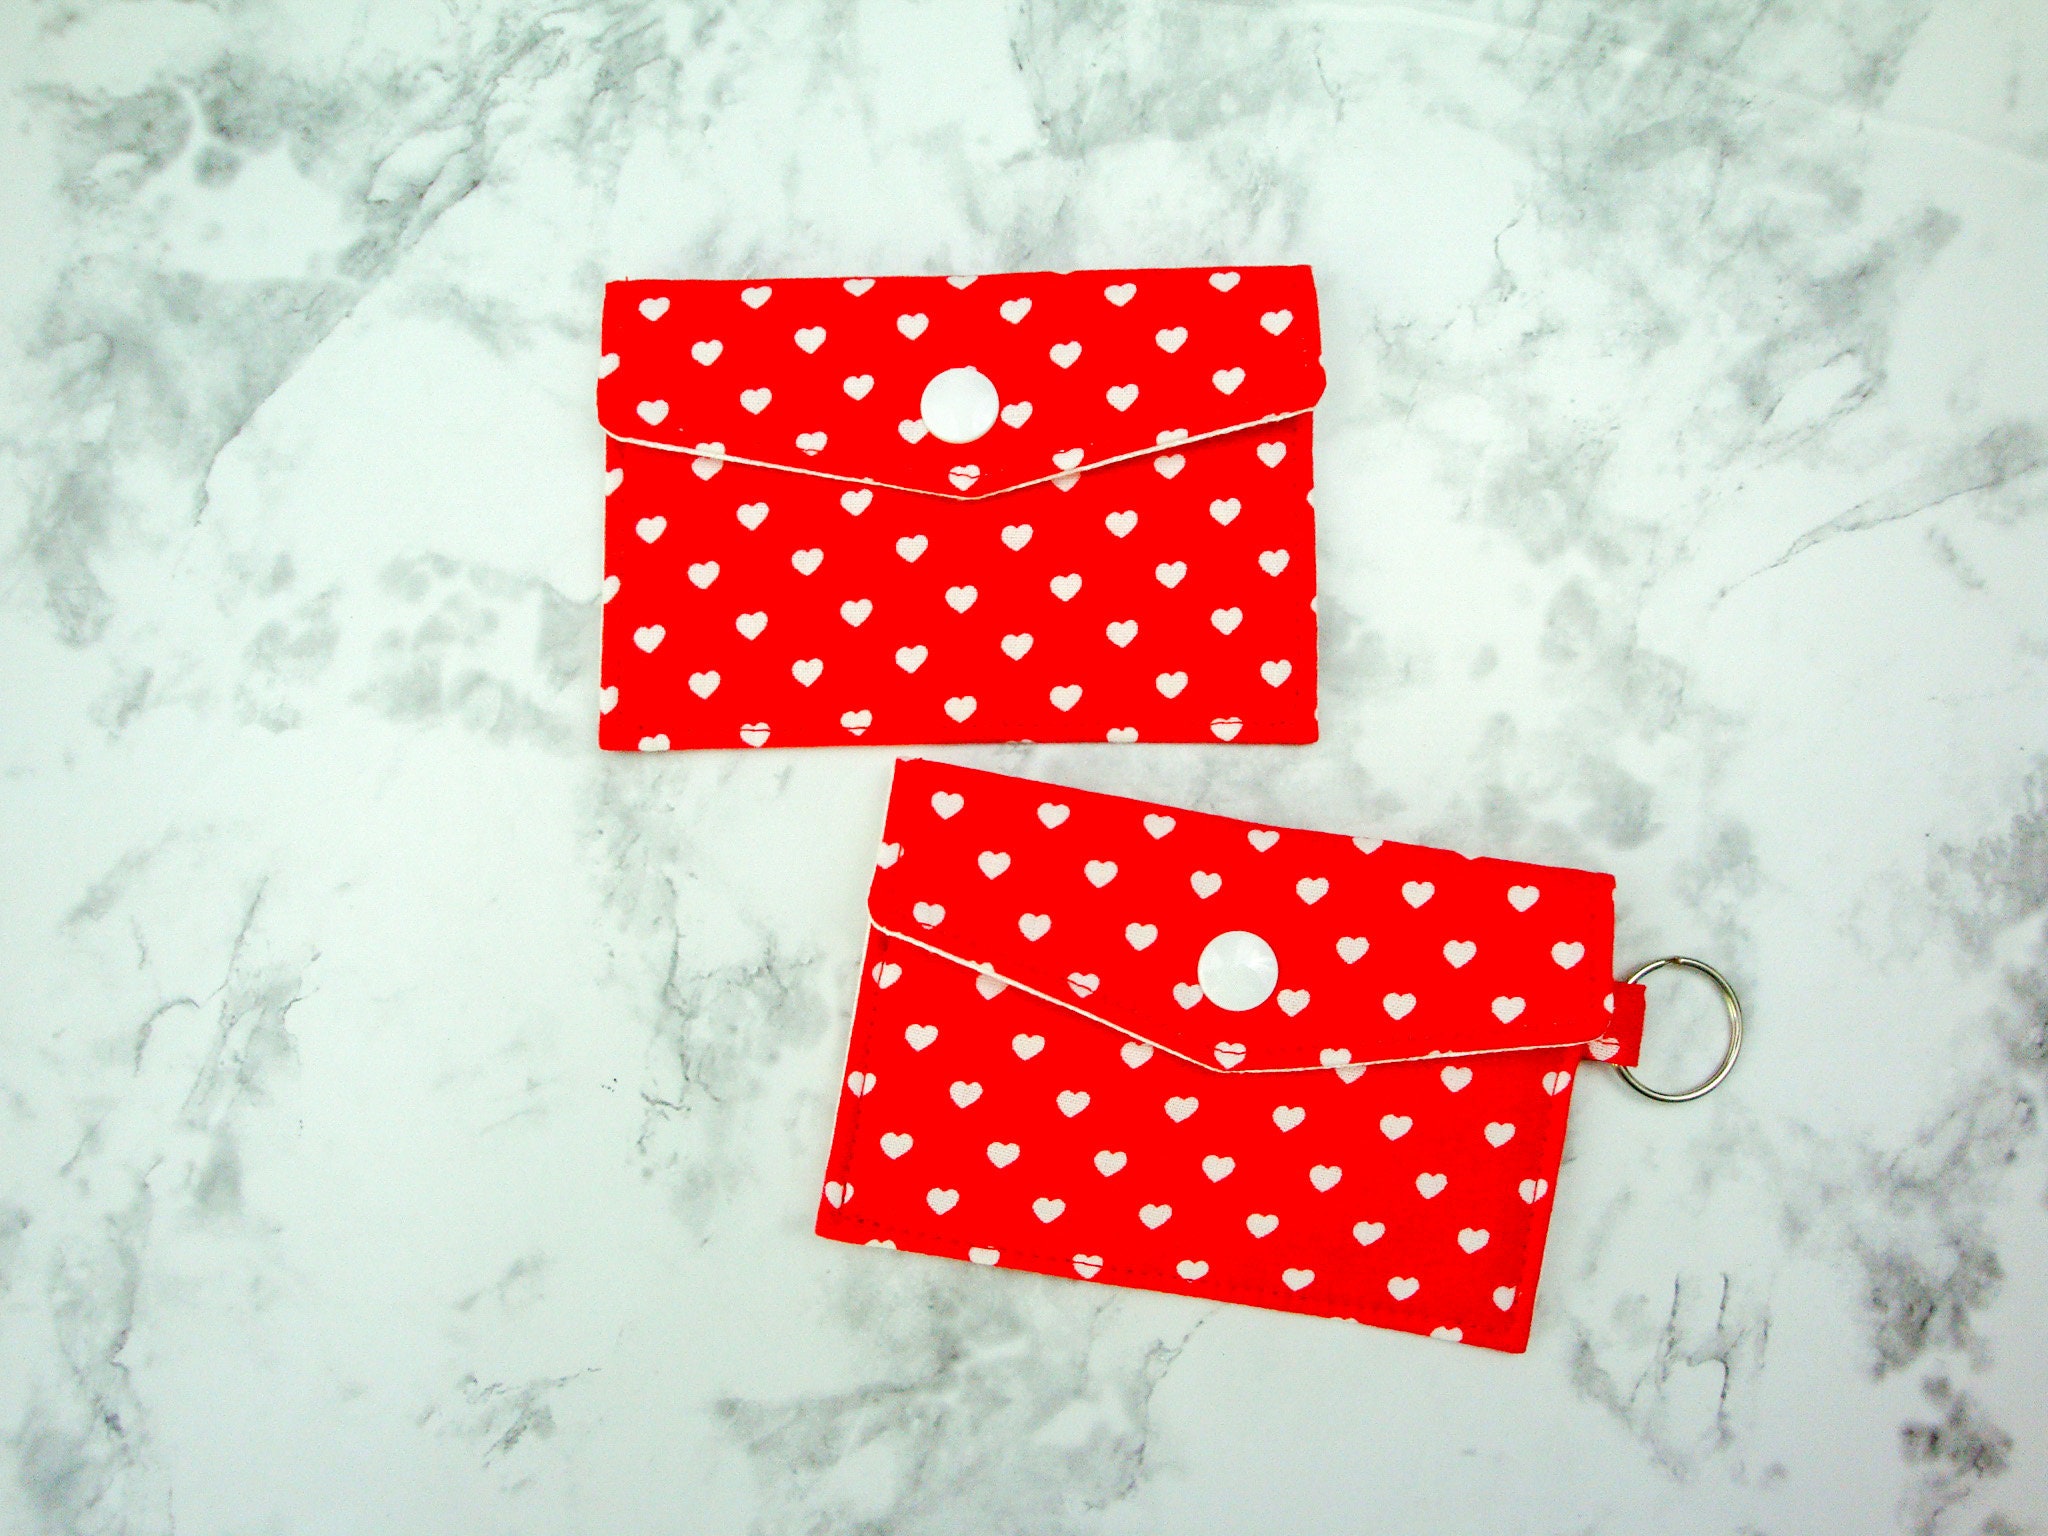  Gift Card Holder - Just for You, Red & White (100